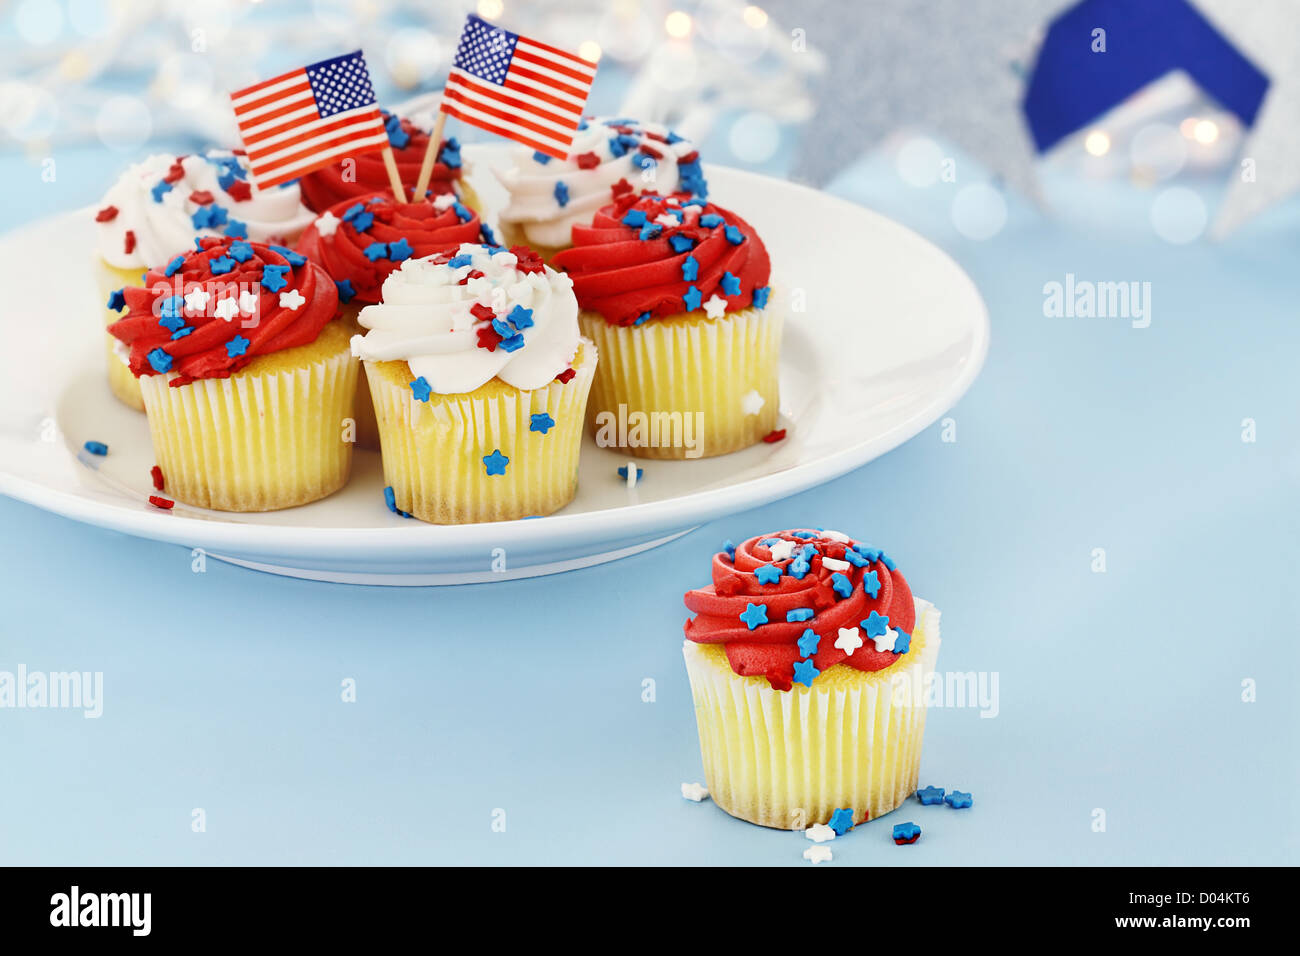 American patriotic themed cupcakes for the 4th of July Shallow depth of field with selective focus on cupcake in foreground. Stock Photo